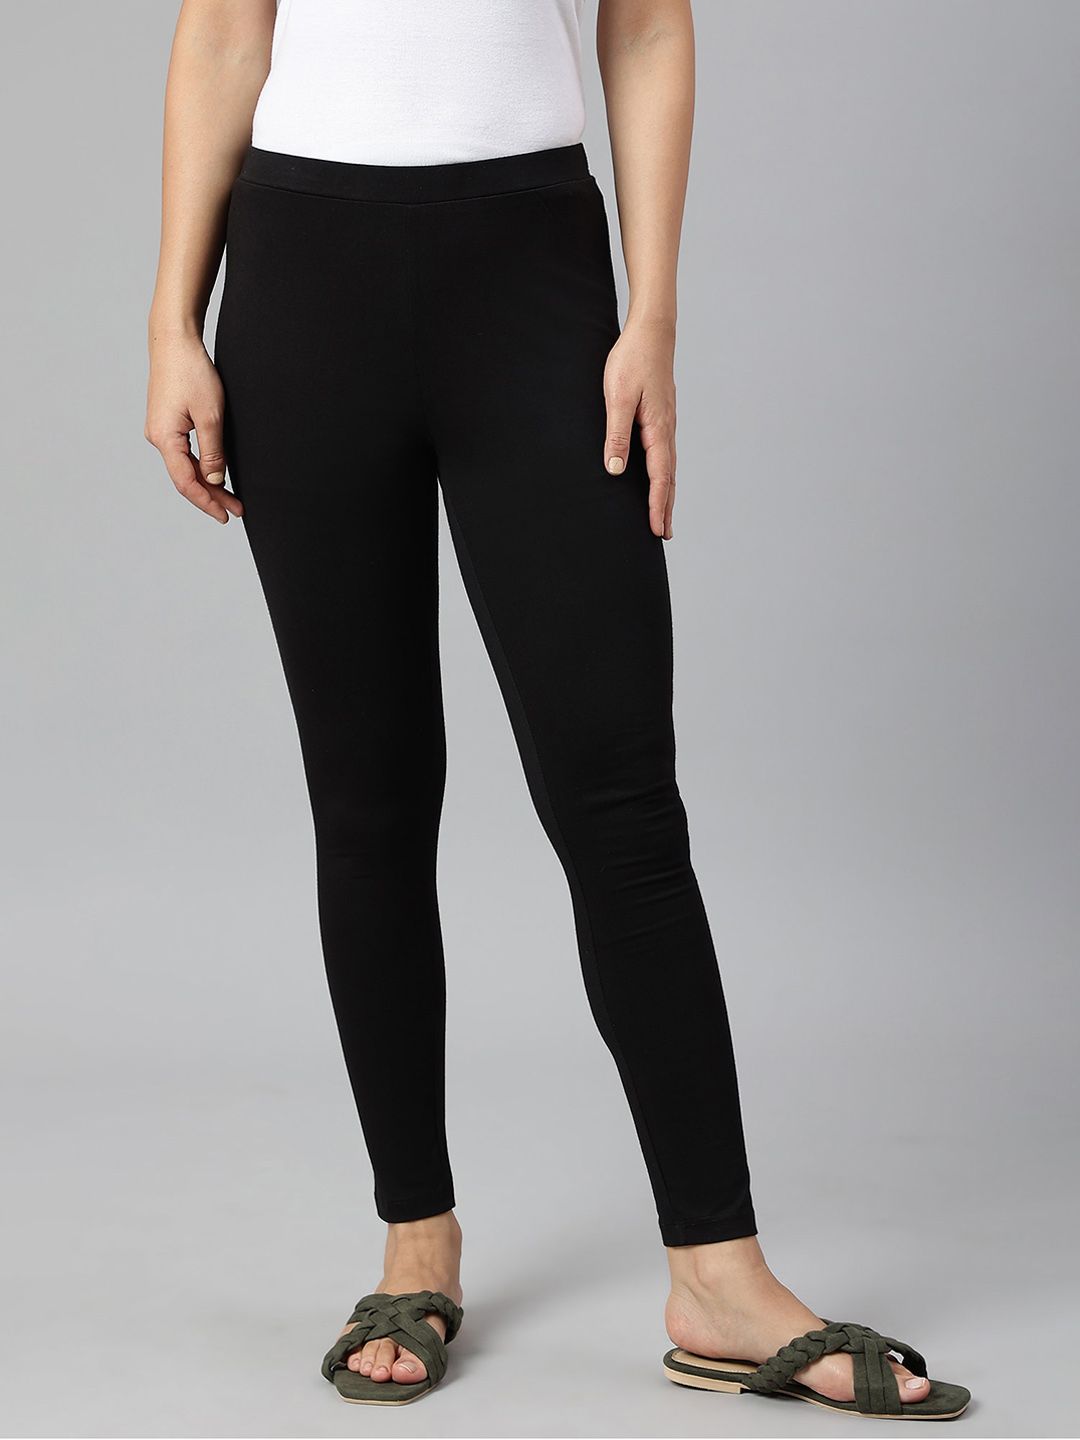 W Women Black Solid Ankle-Length Leggings Price in India